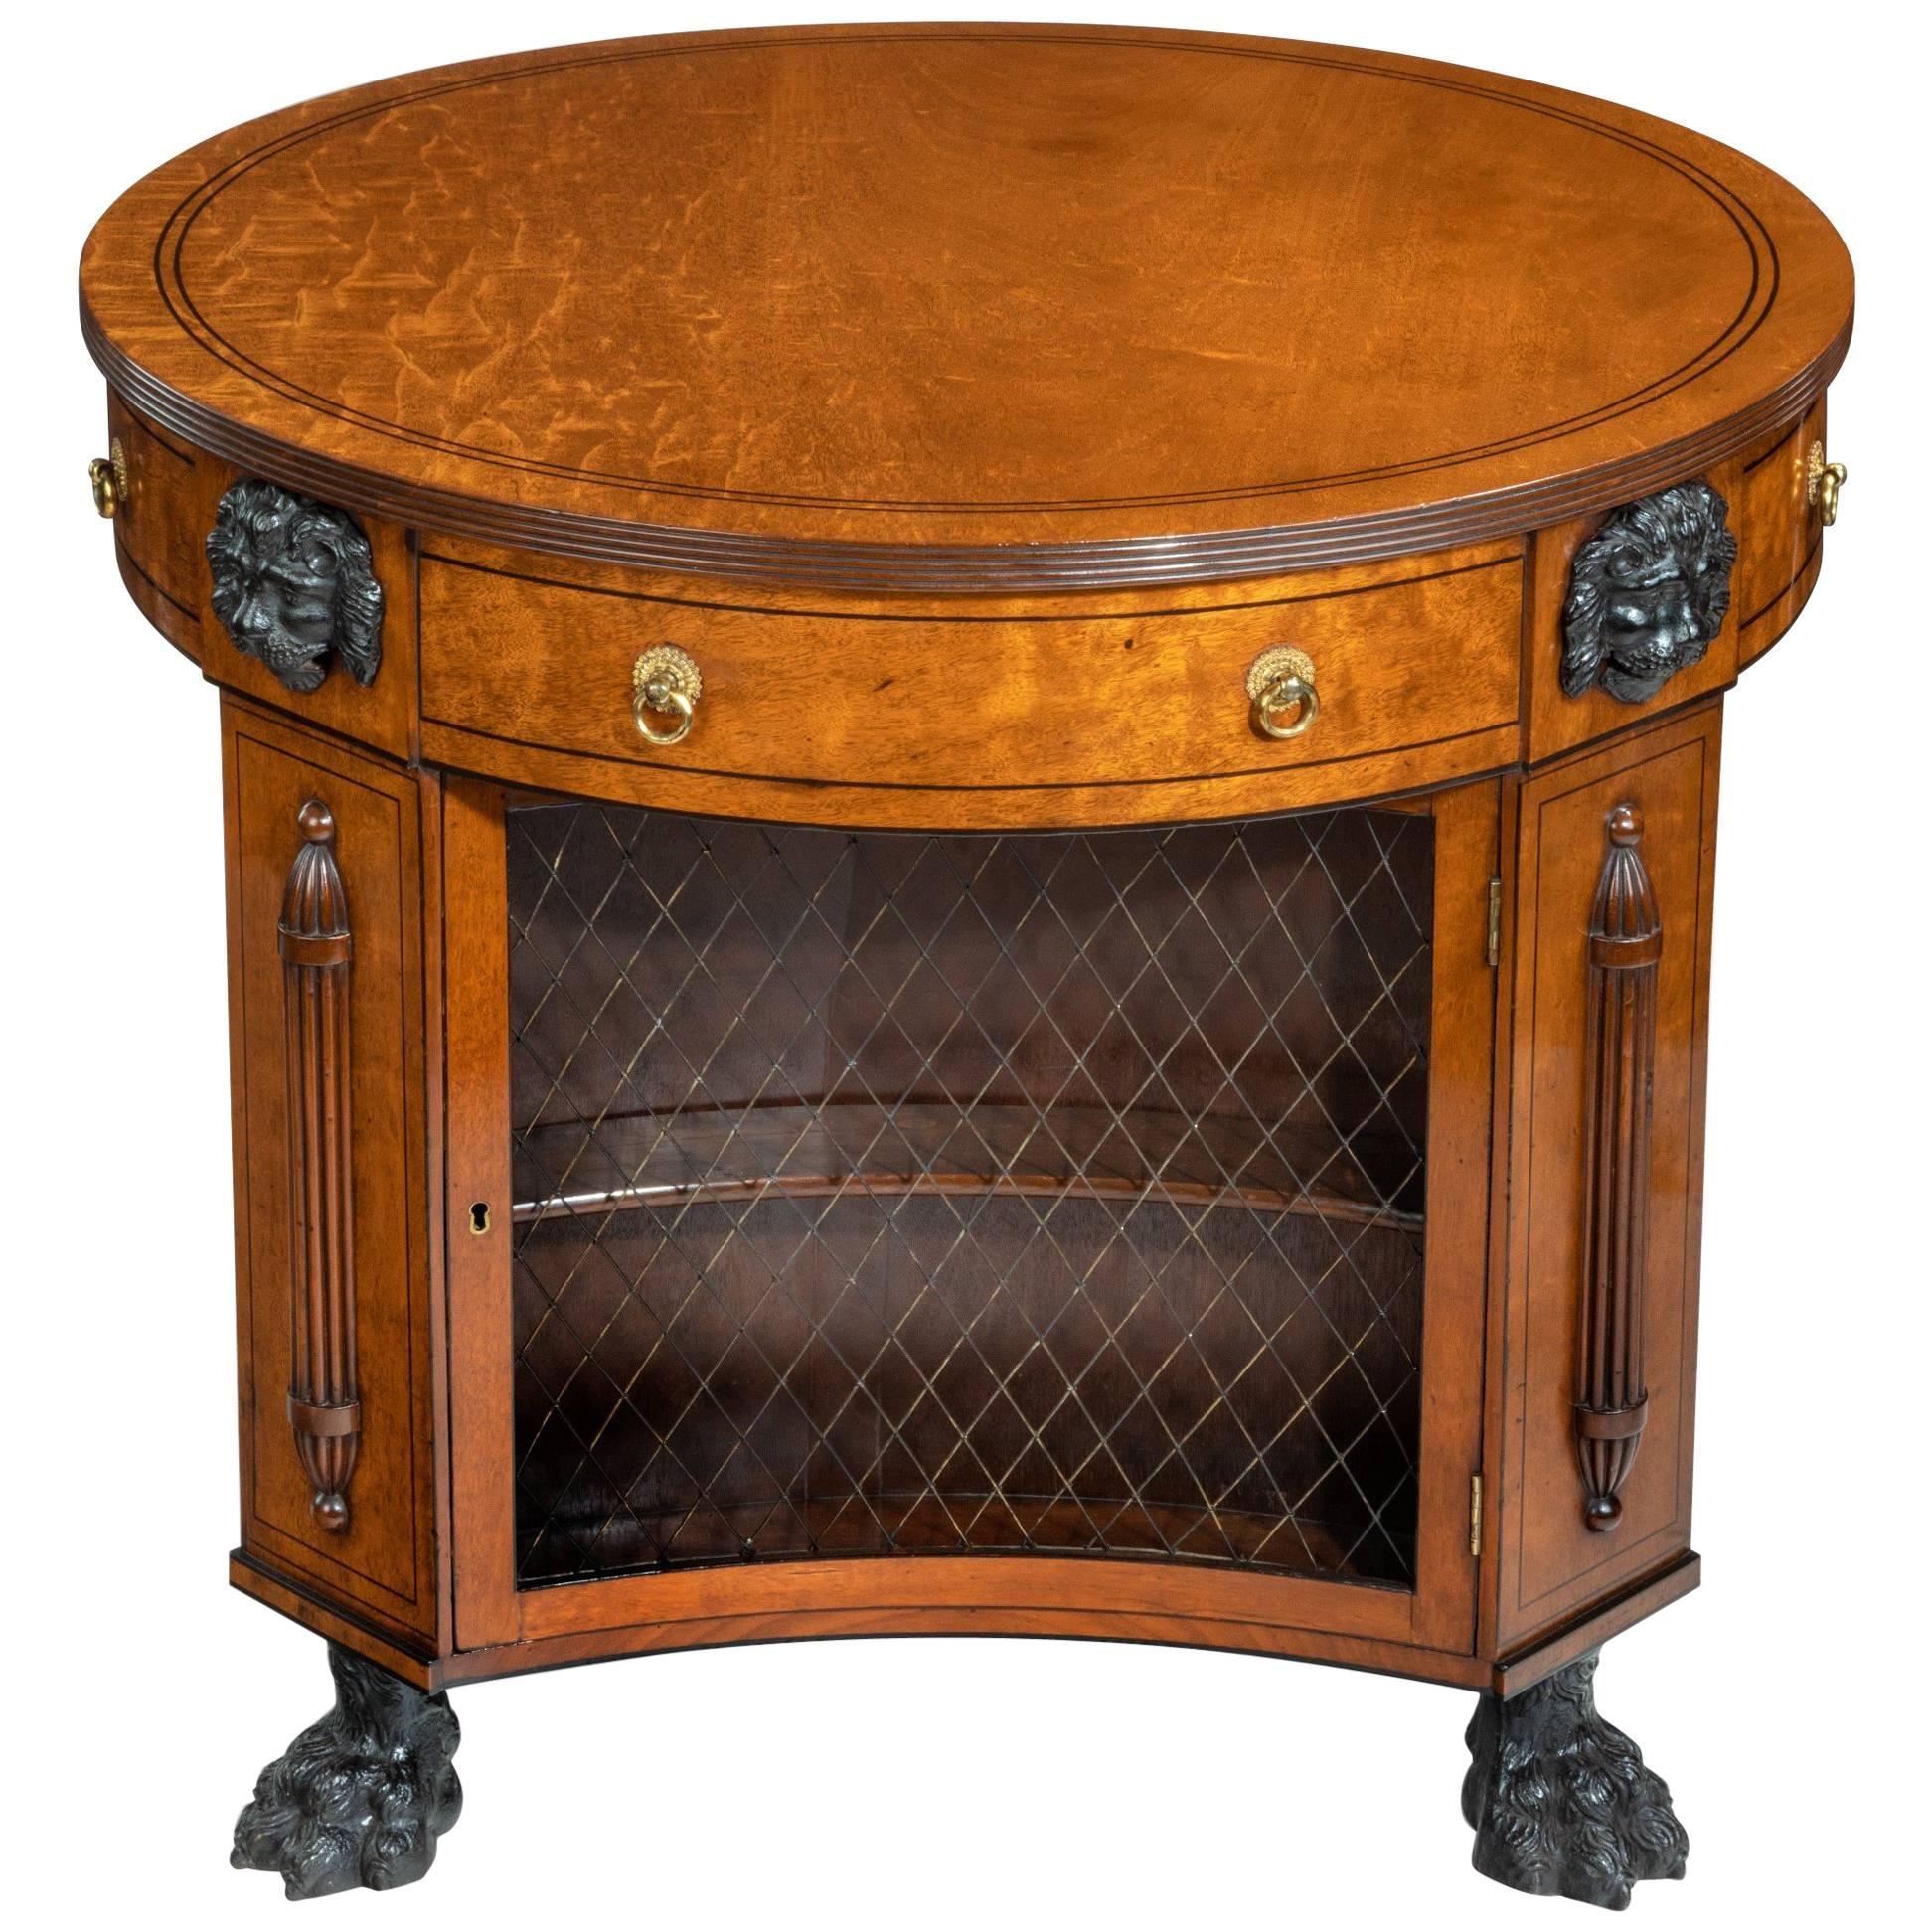 Regency Plum-Pudding Mahogany Library Centre Table and Bookcase